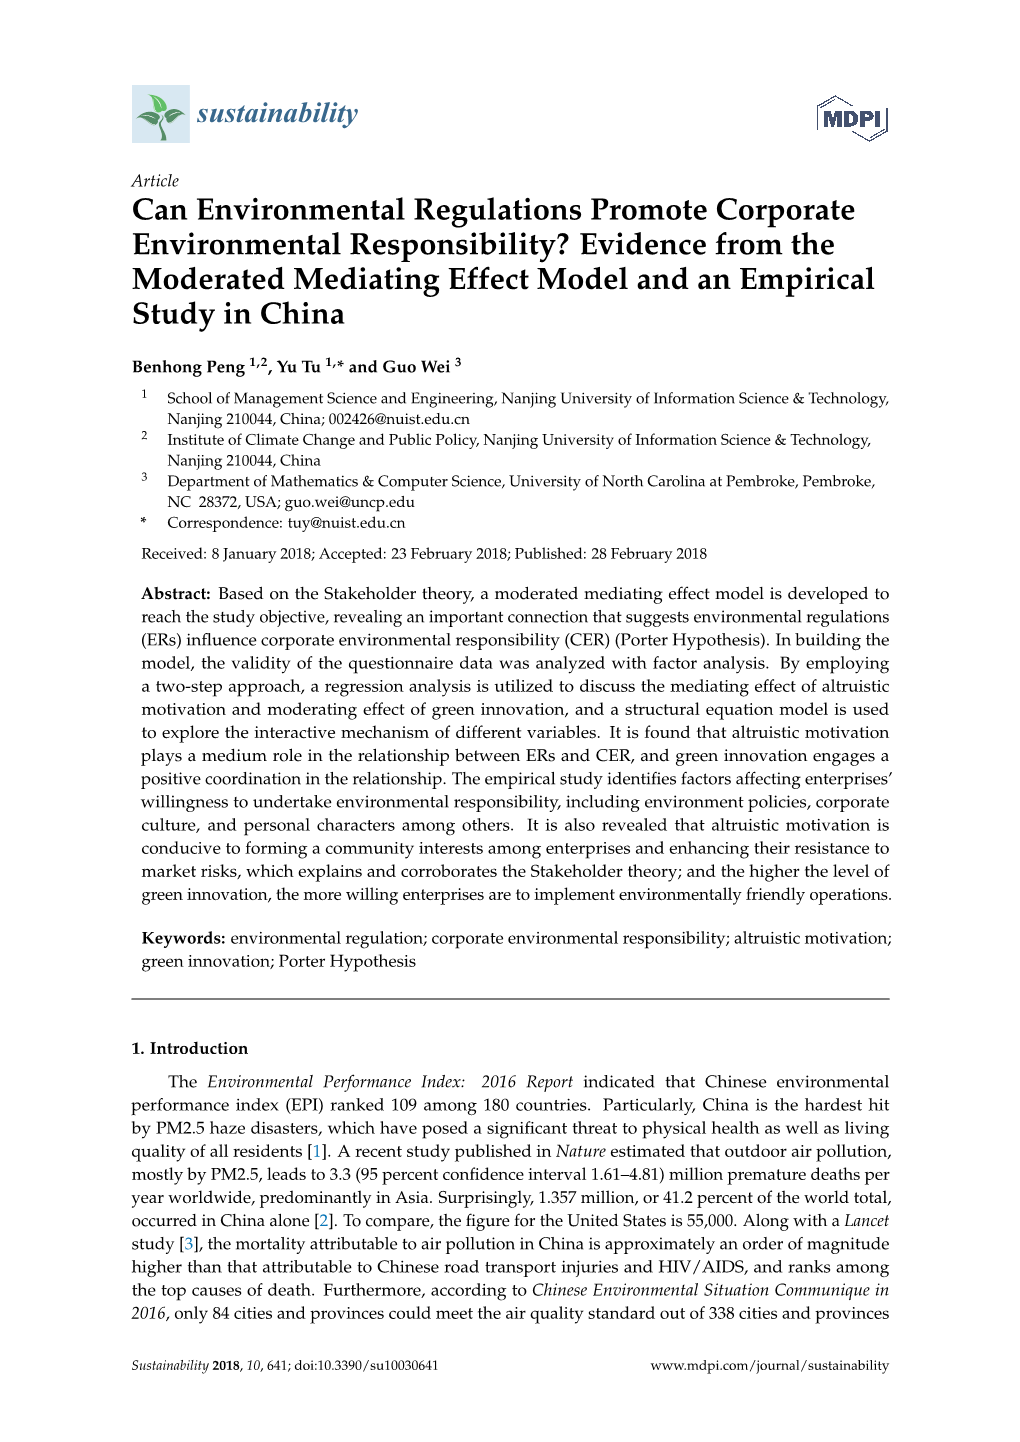 Can Environmental Regulations Promote Corporate Environmental Responsibility? Evidence from the Moderated Mediating Effect Model and an Empirical Study in China